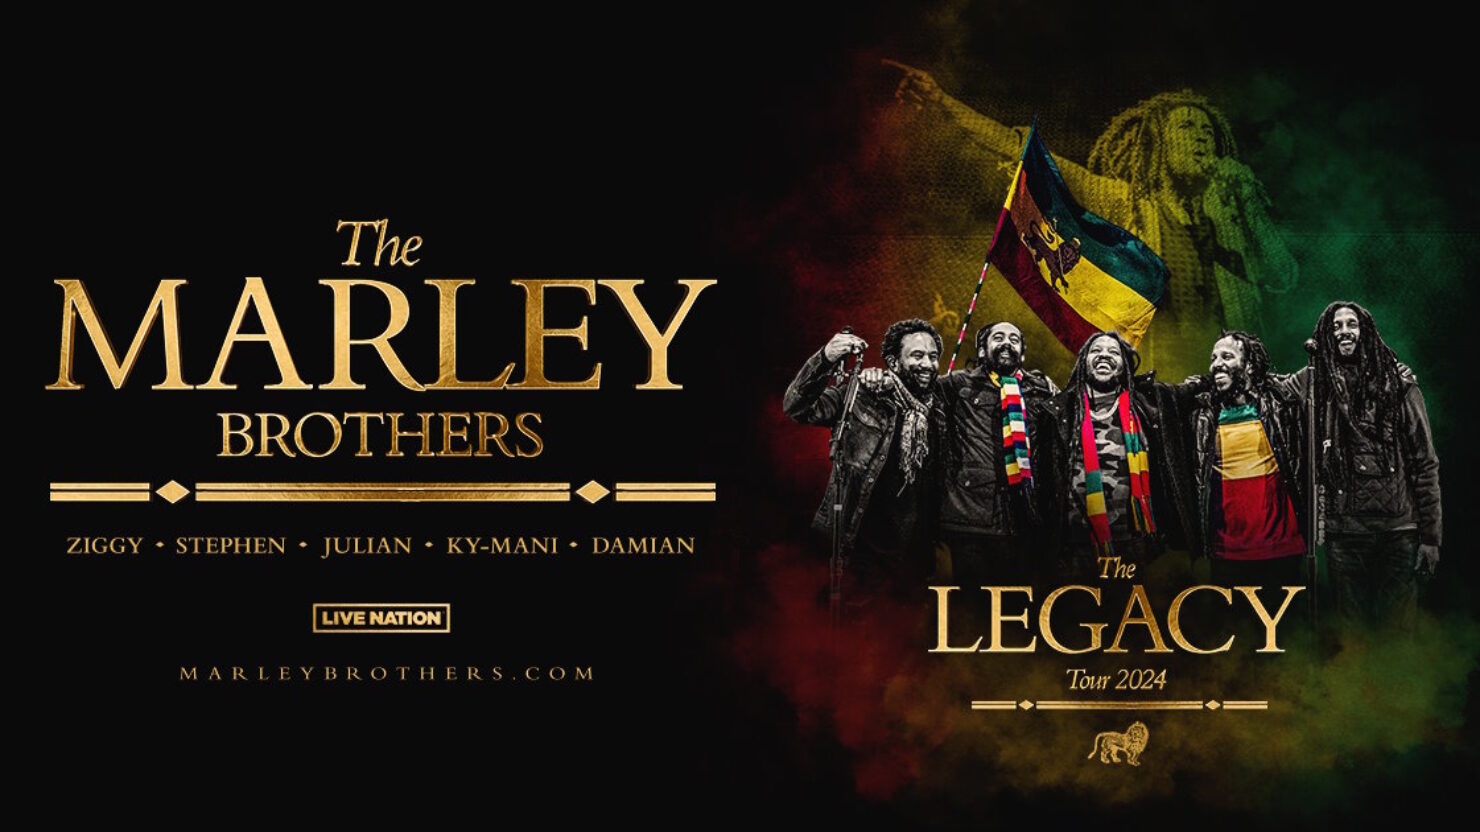  Bob Marley’s Sons Announce The Marley Brothers: The Legacy Tour 